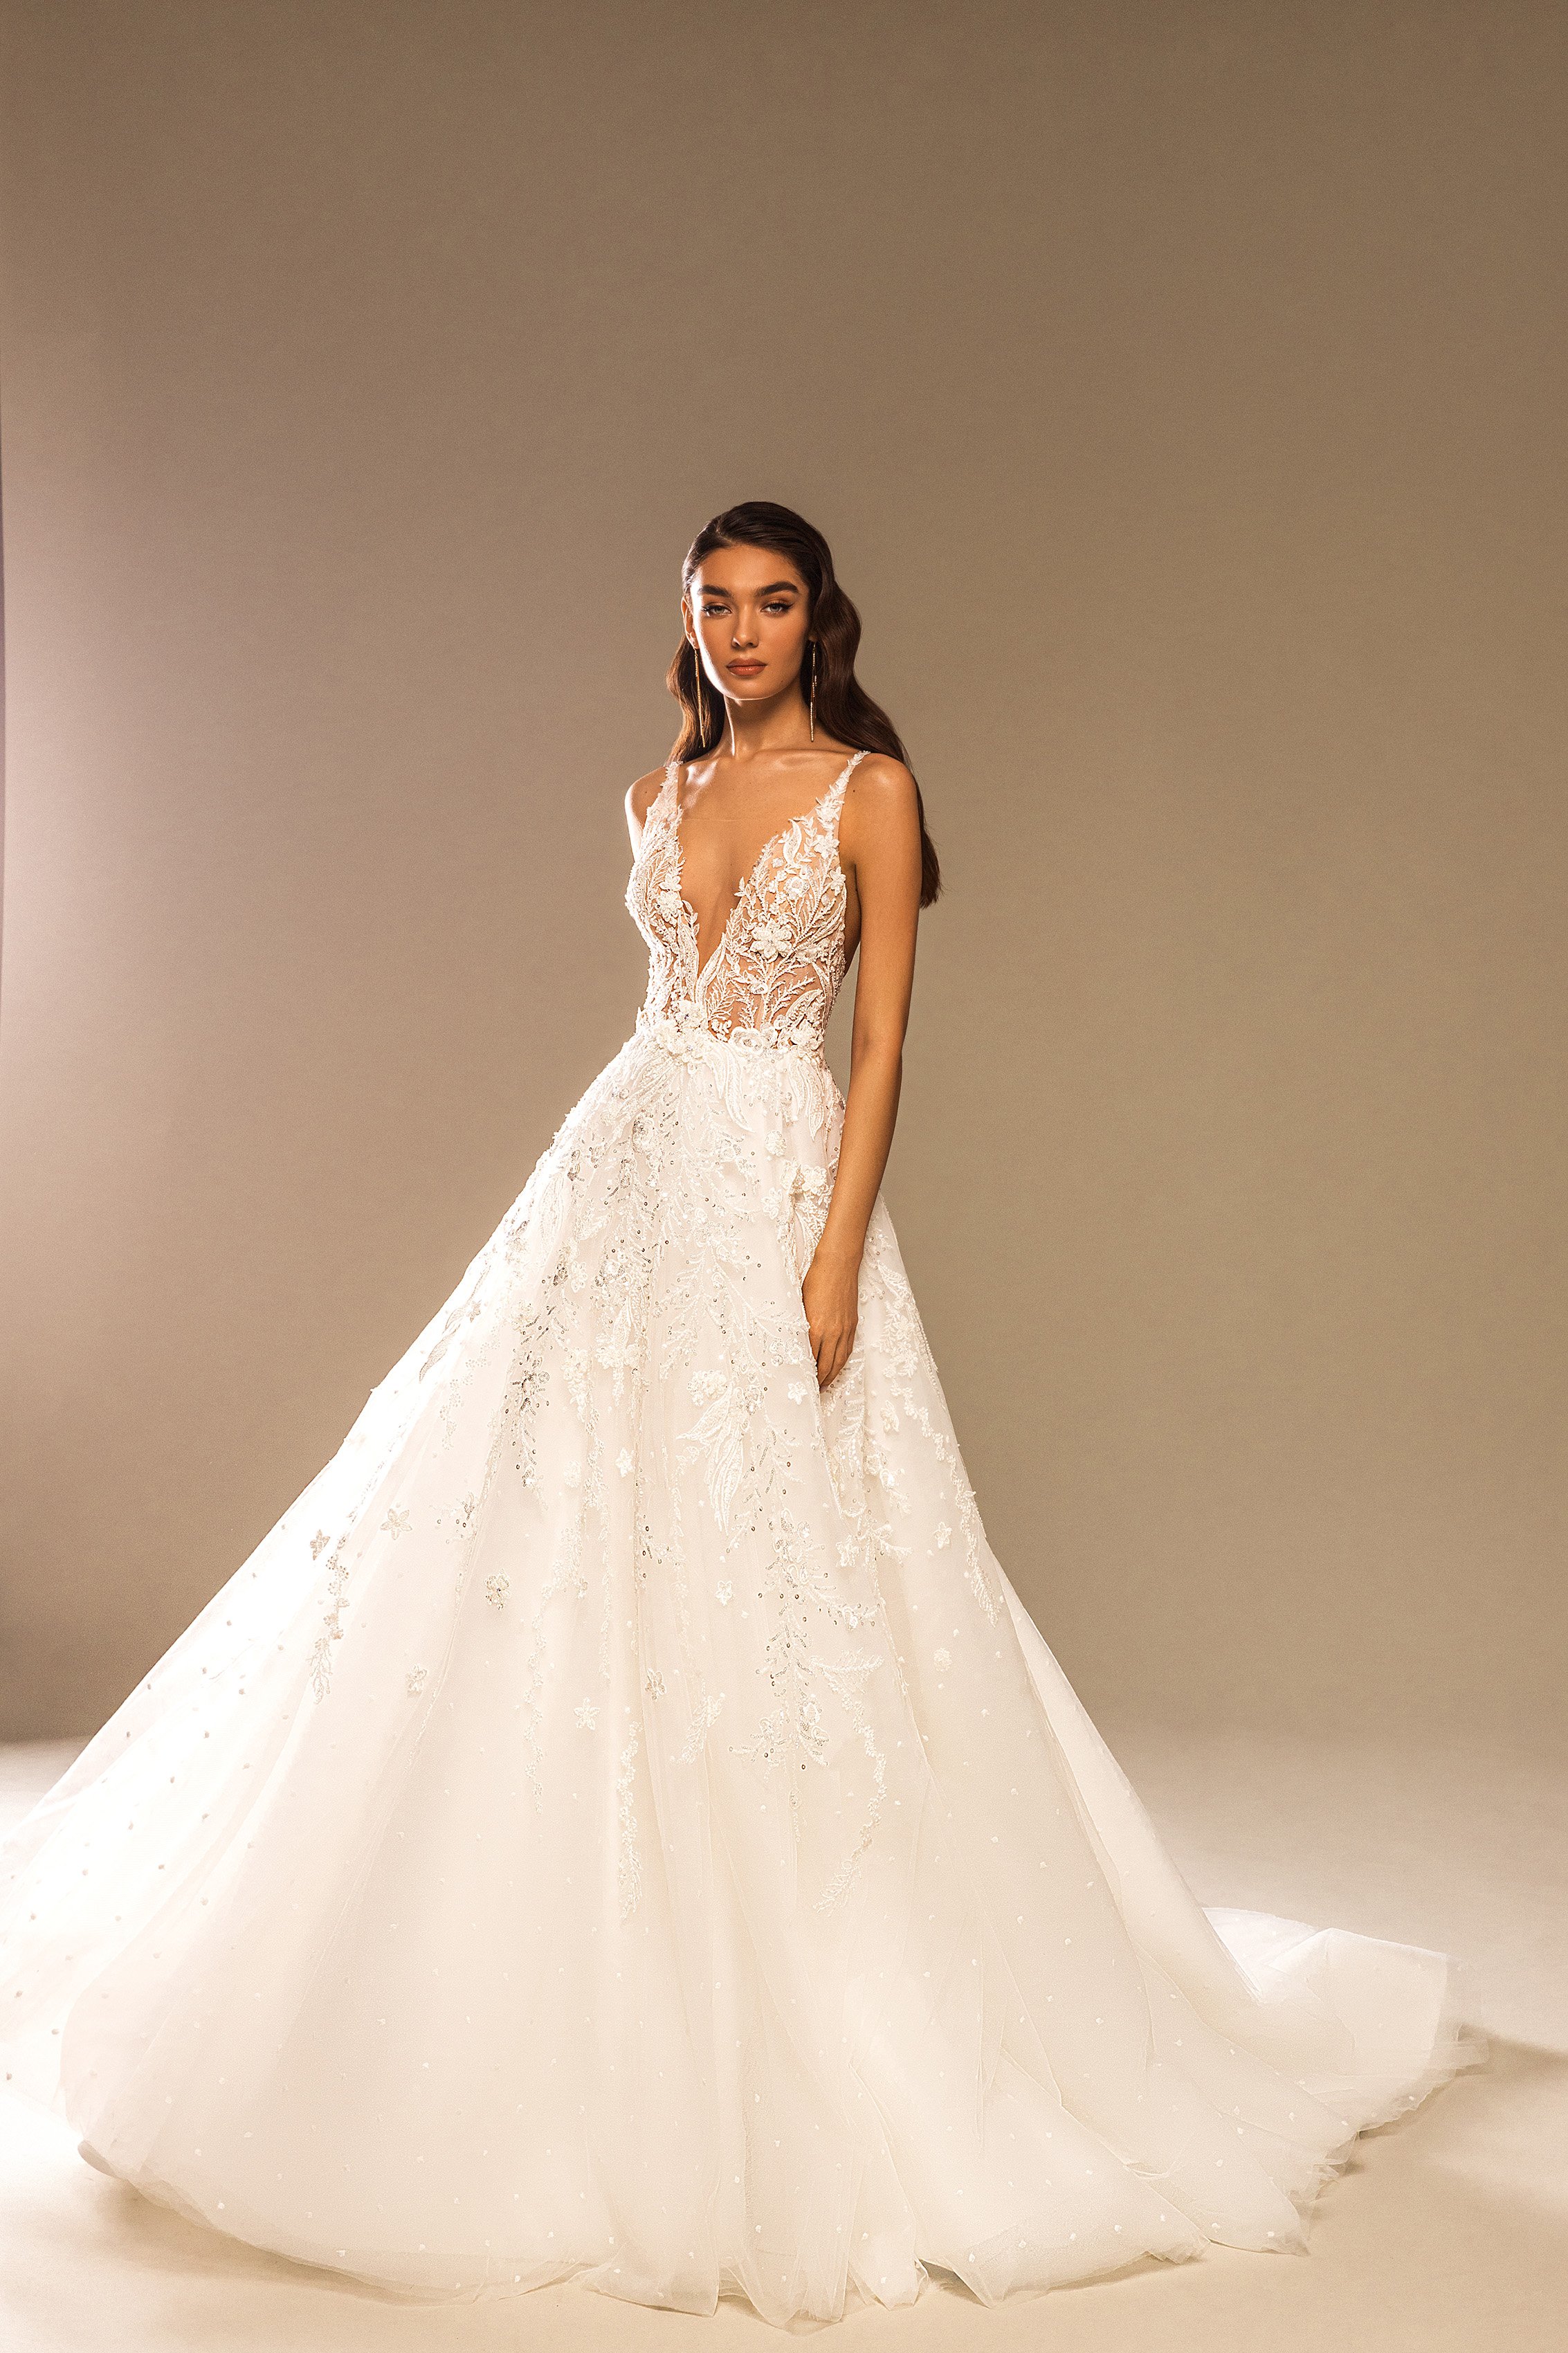 Wedding dresses you can dance in all night long by Mila Bridal